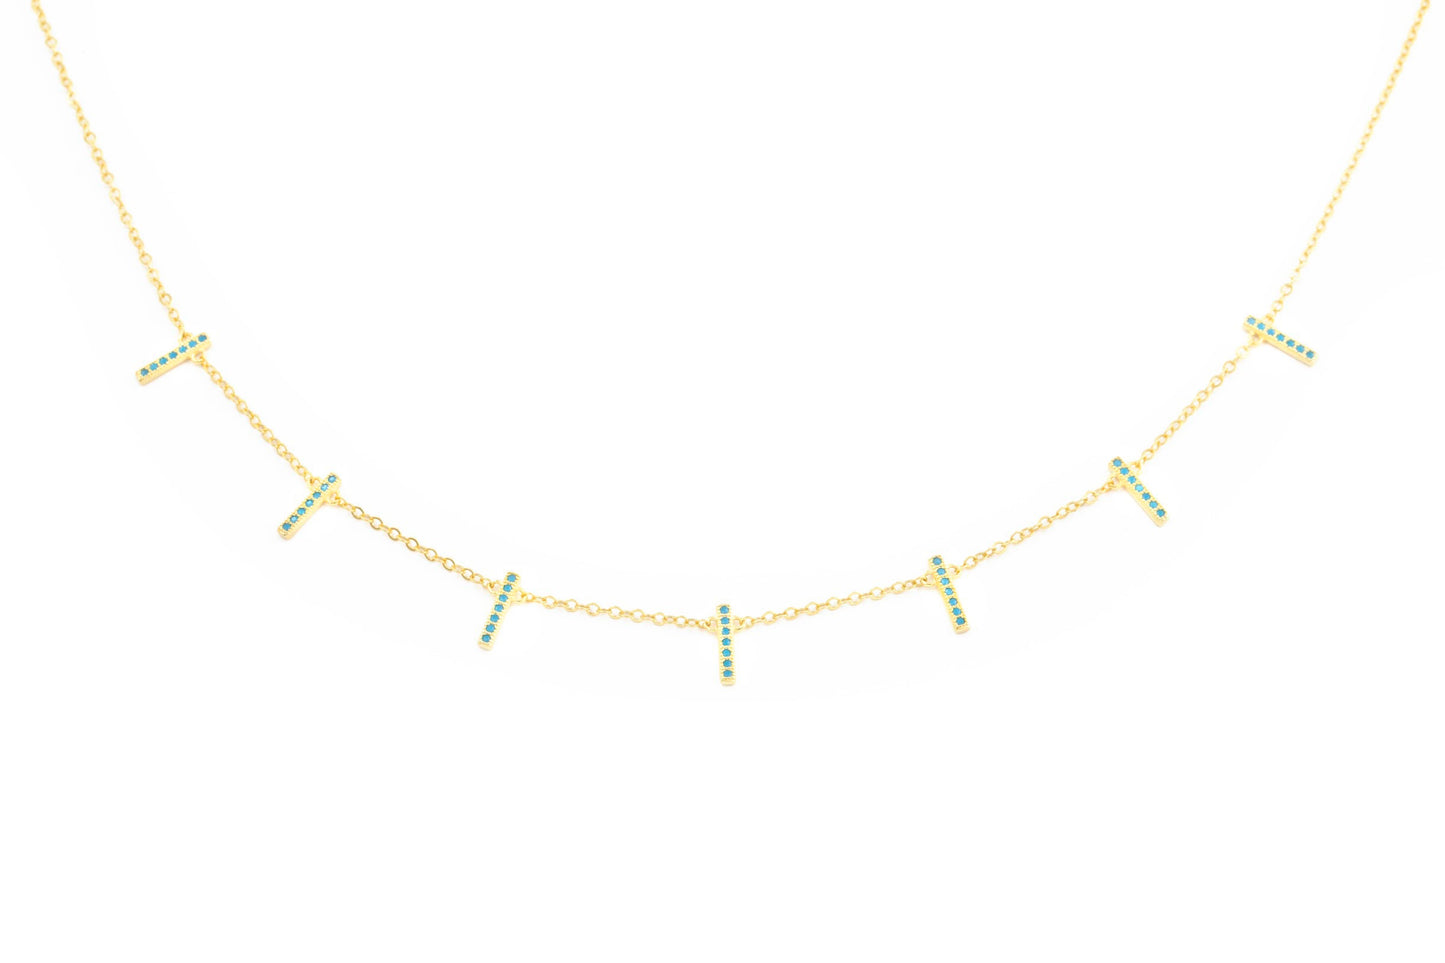 Teal Me More necklace